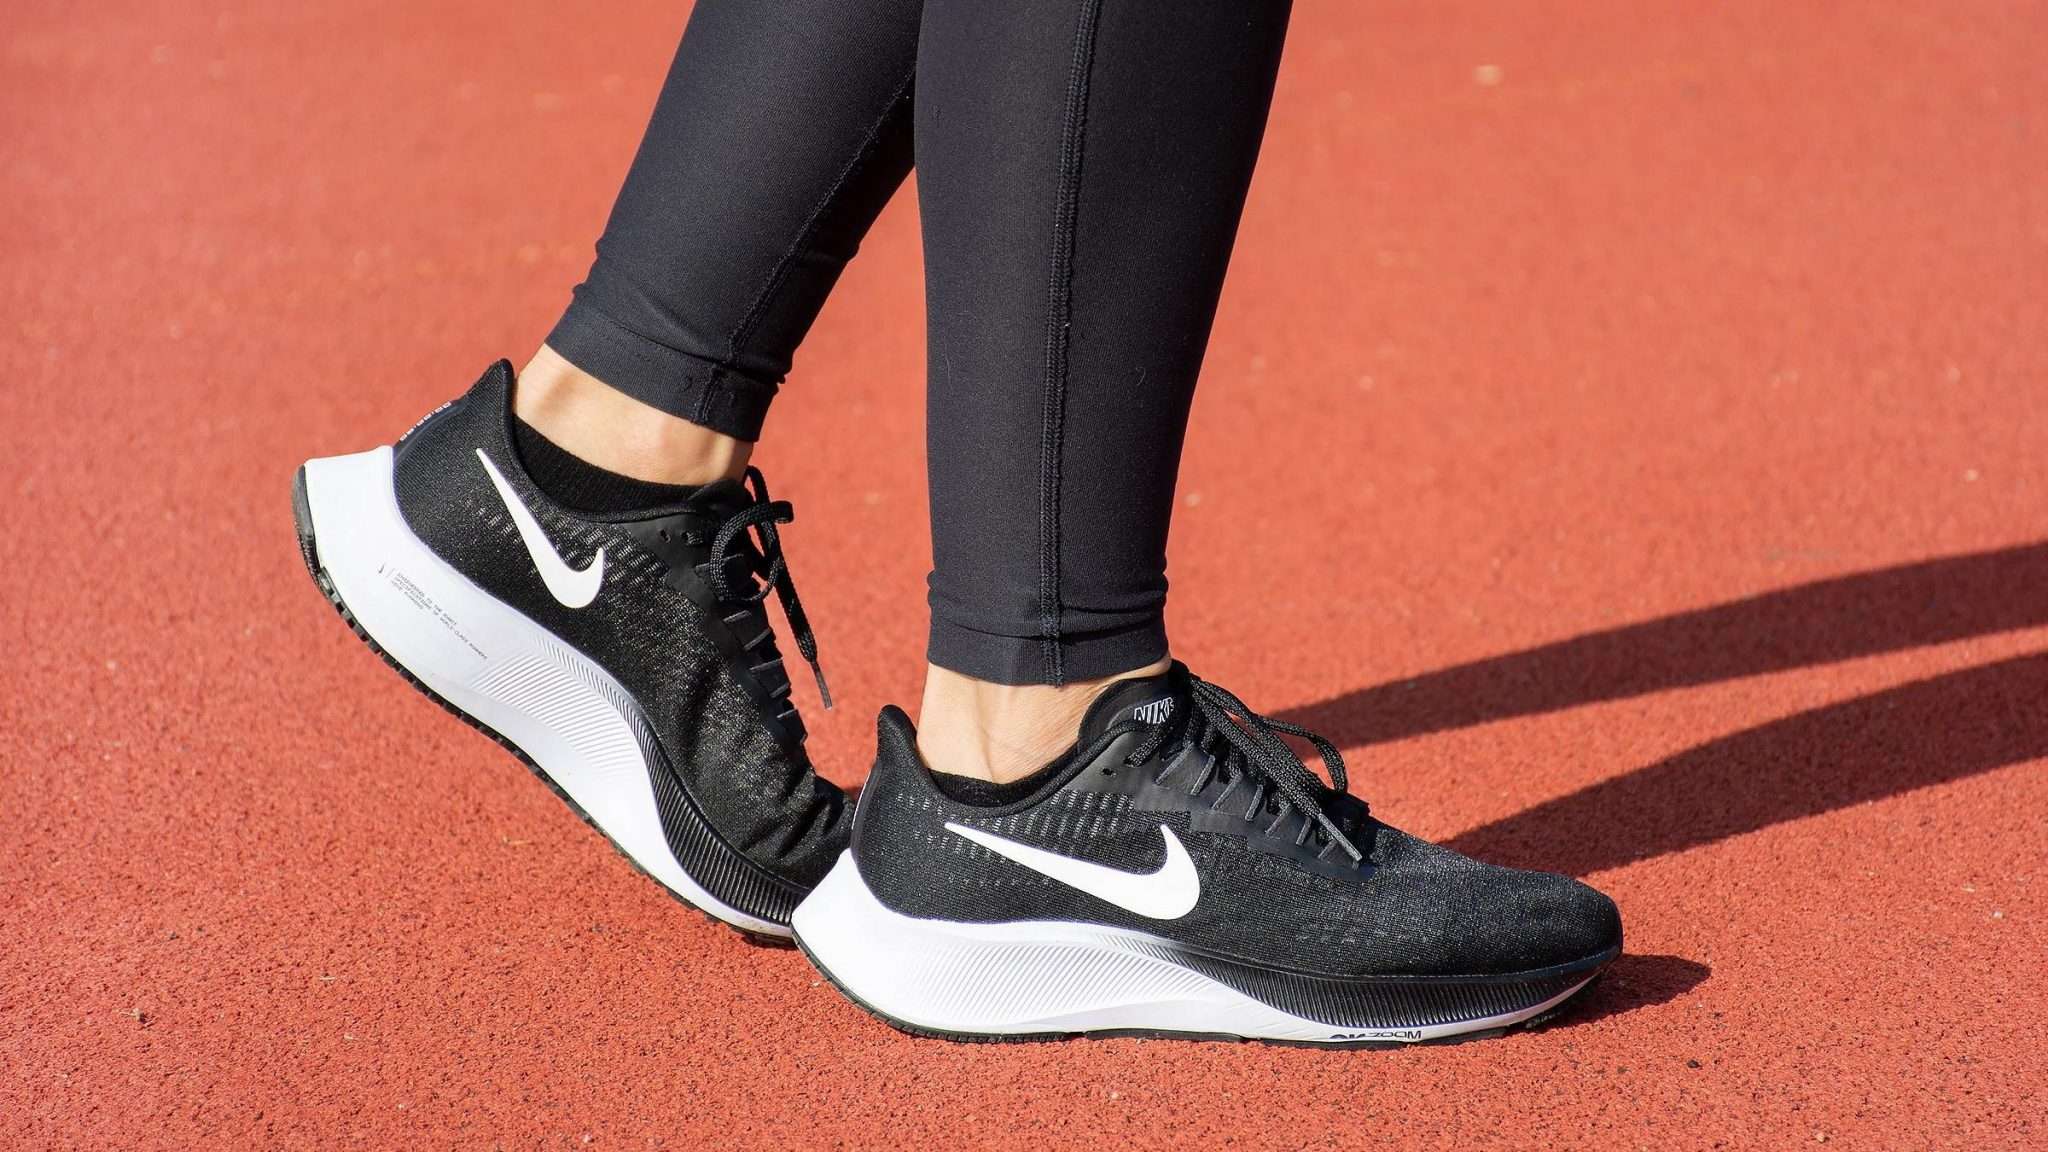 Top Nike sports shoes | Best shoes for the maximum performances